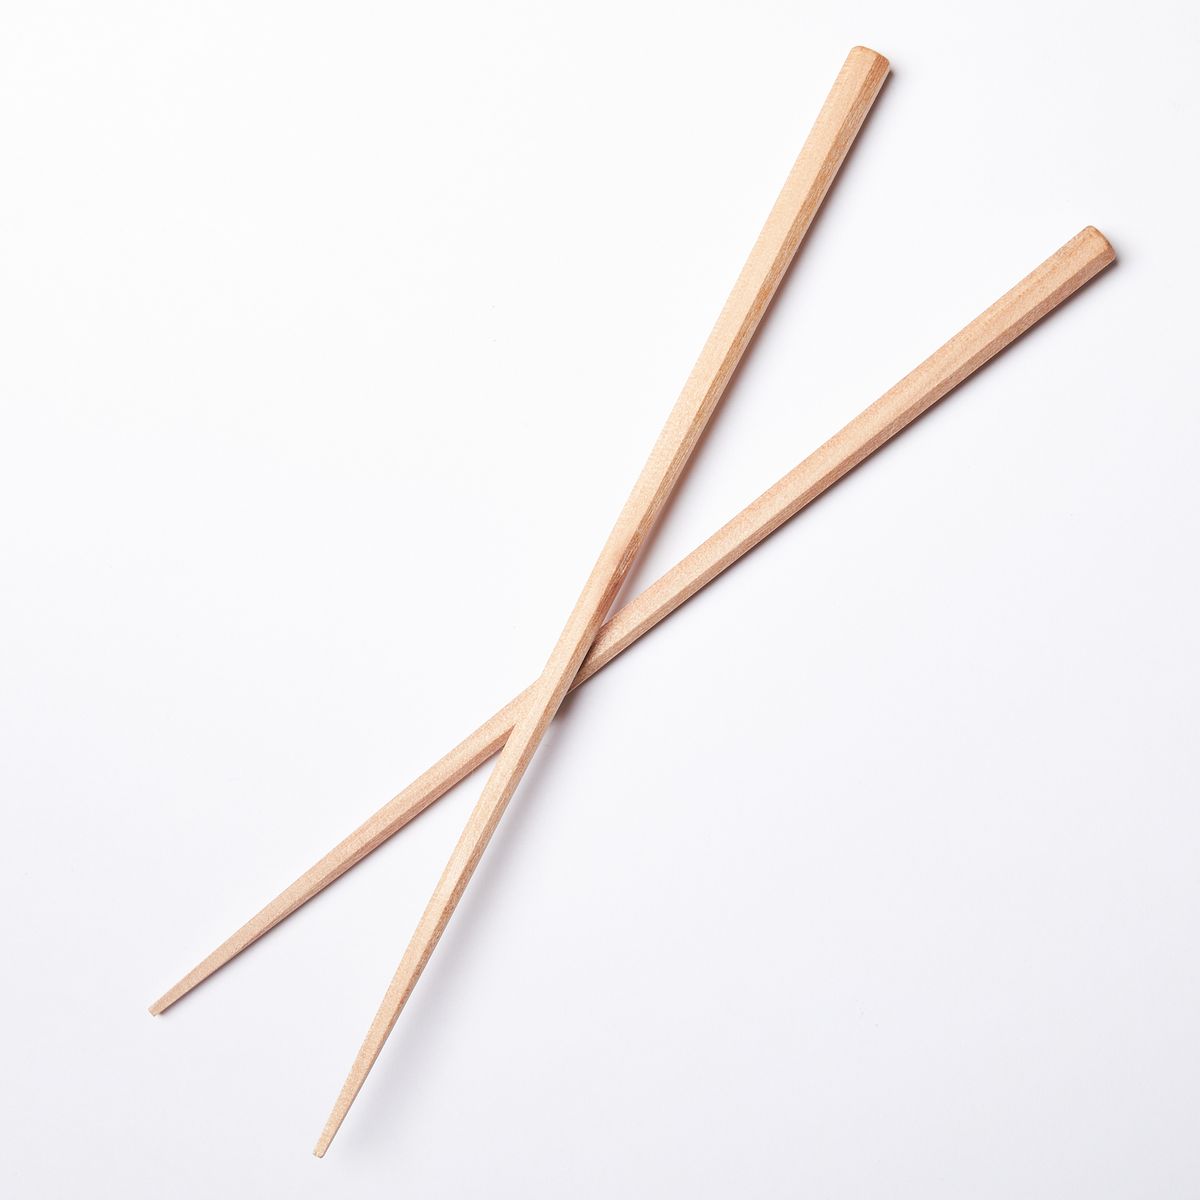 Simple pair of light wood chopsticks stacked over each other